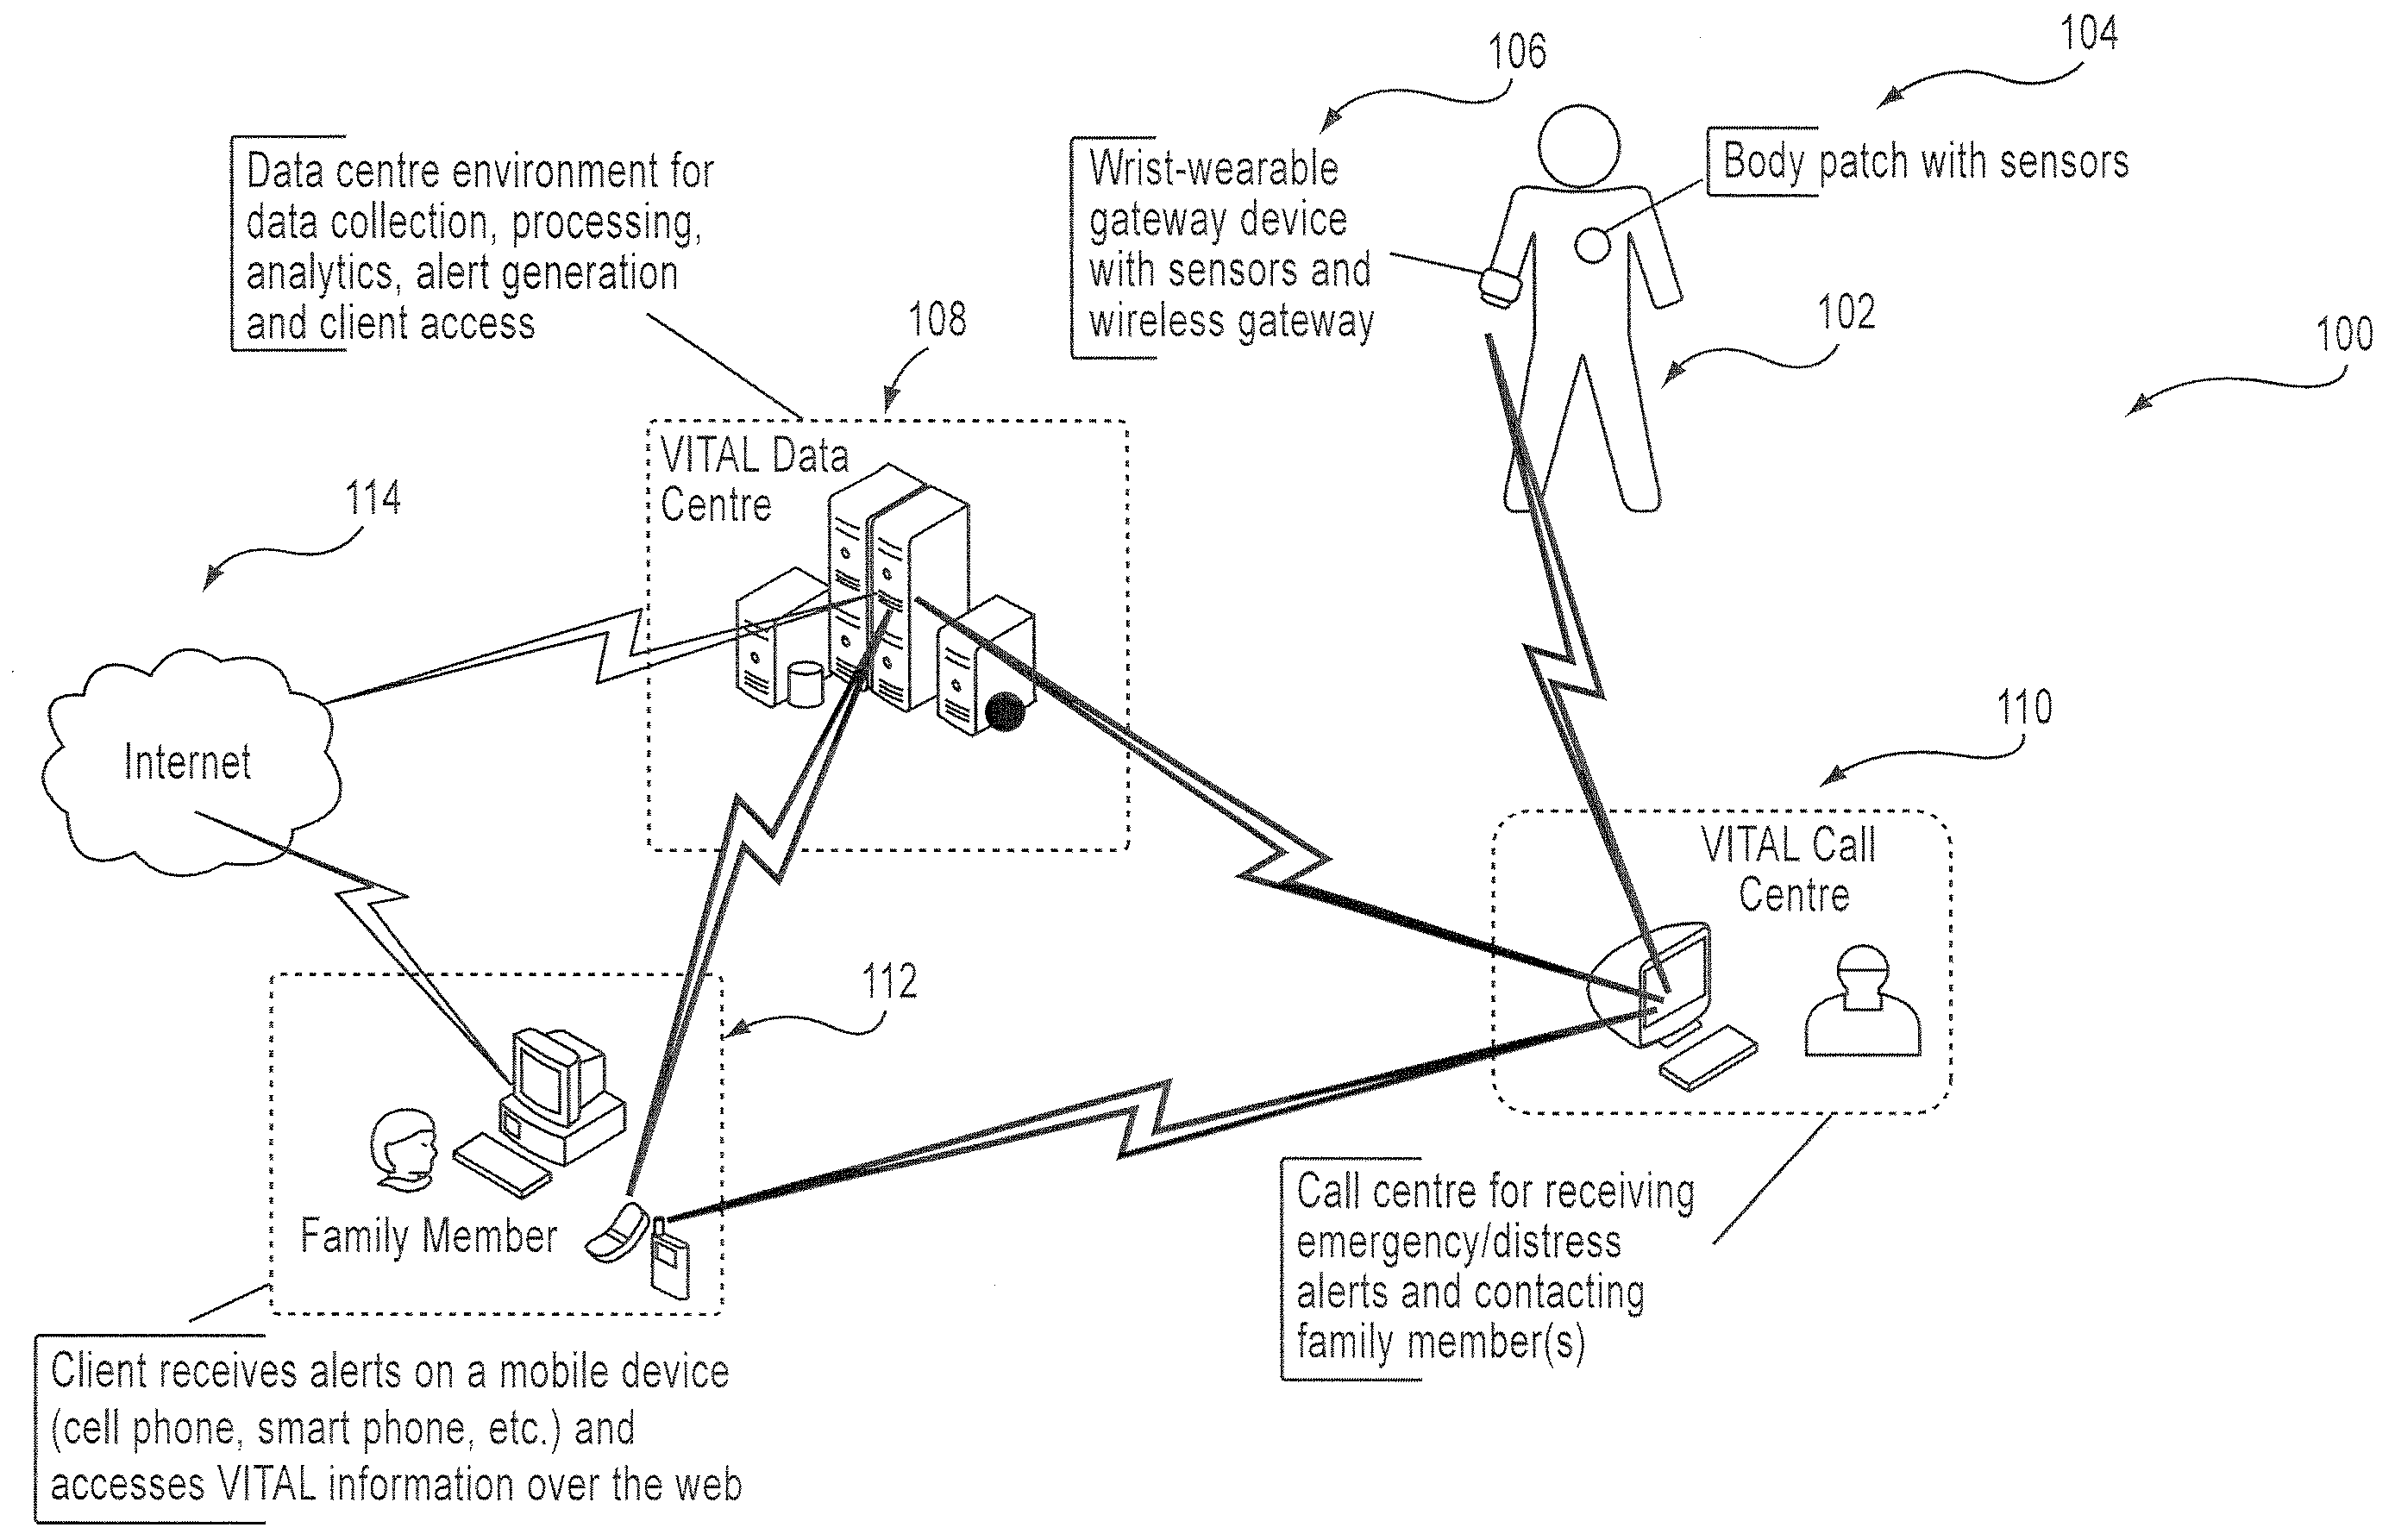 System and method for physlological data readings,
transmission and presentation